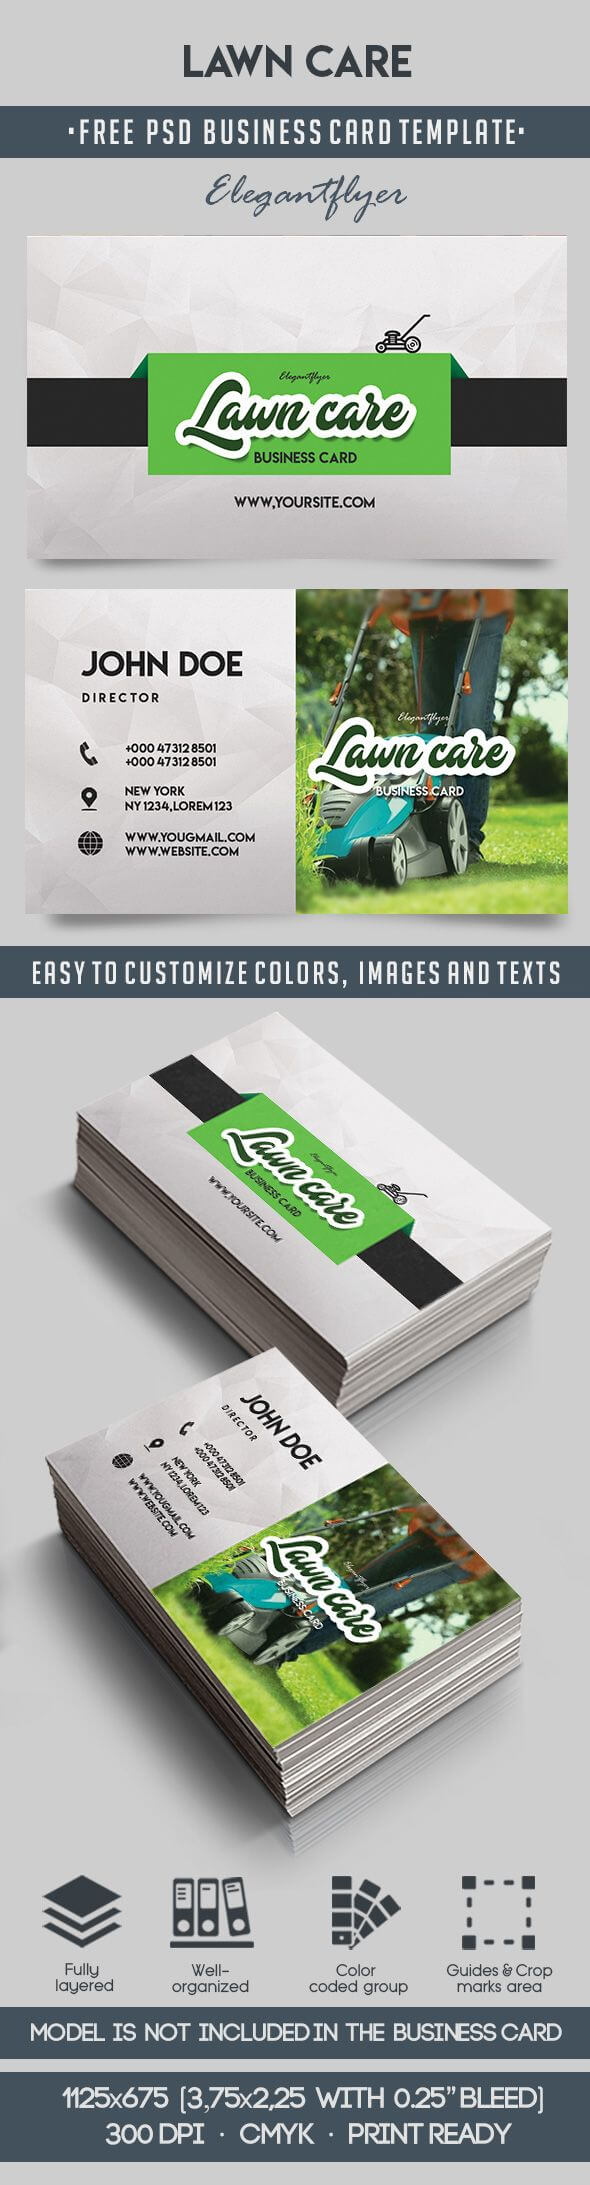 Lawn Care Business Cards Templates Free – Yatay Intended For Lawn Care Business Cards Templates Free